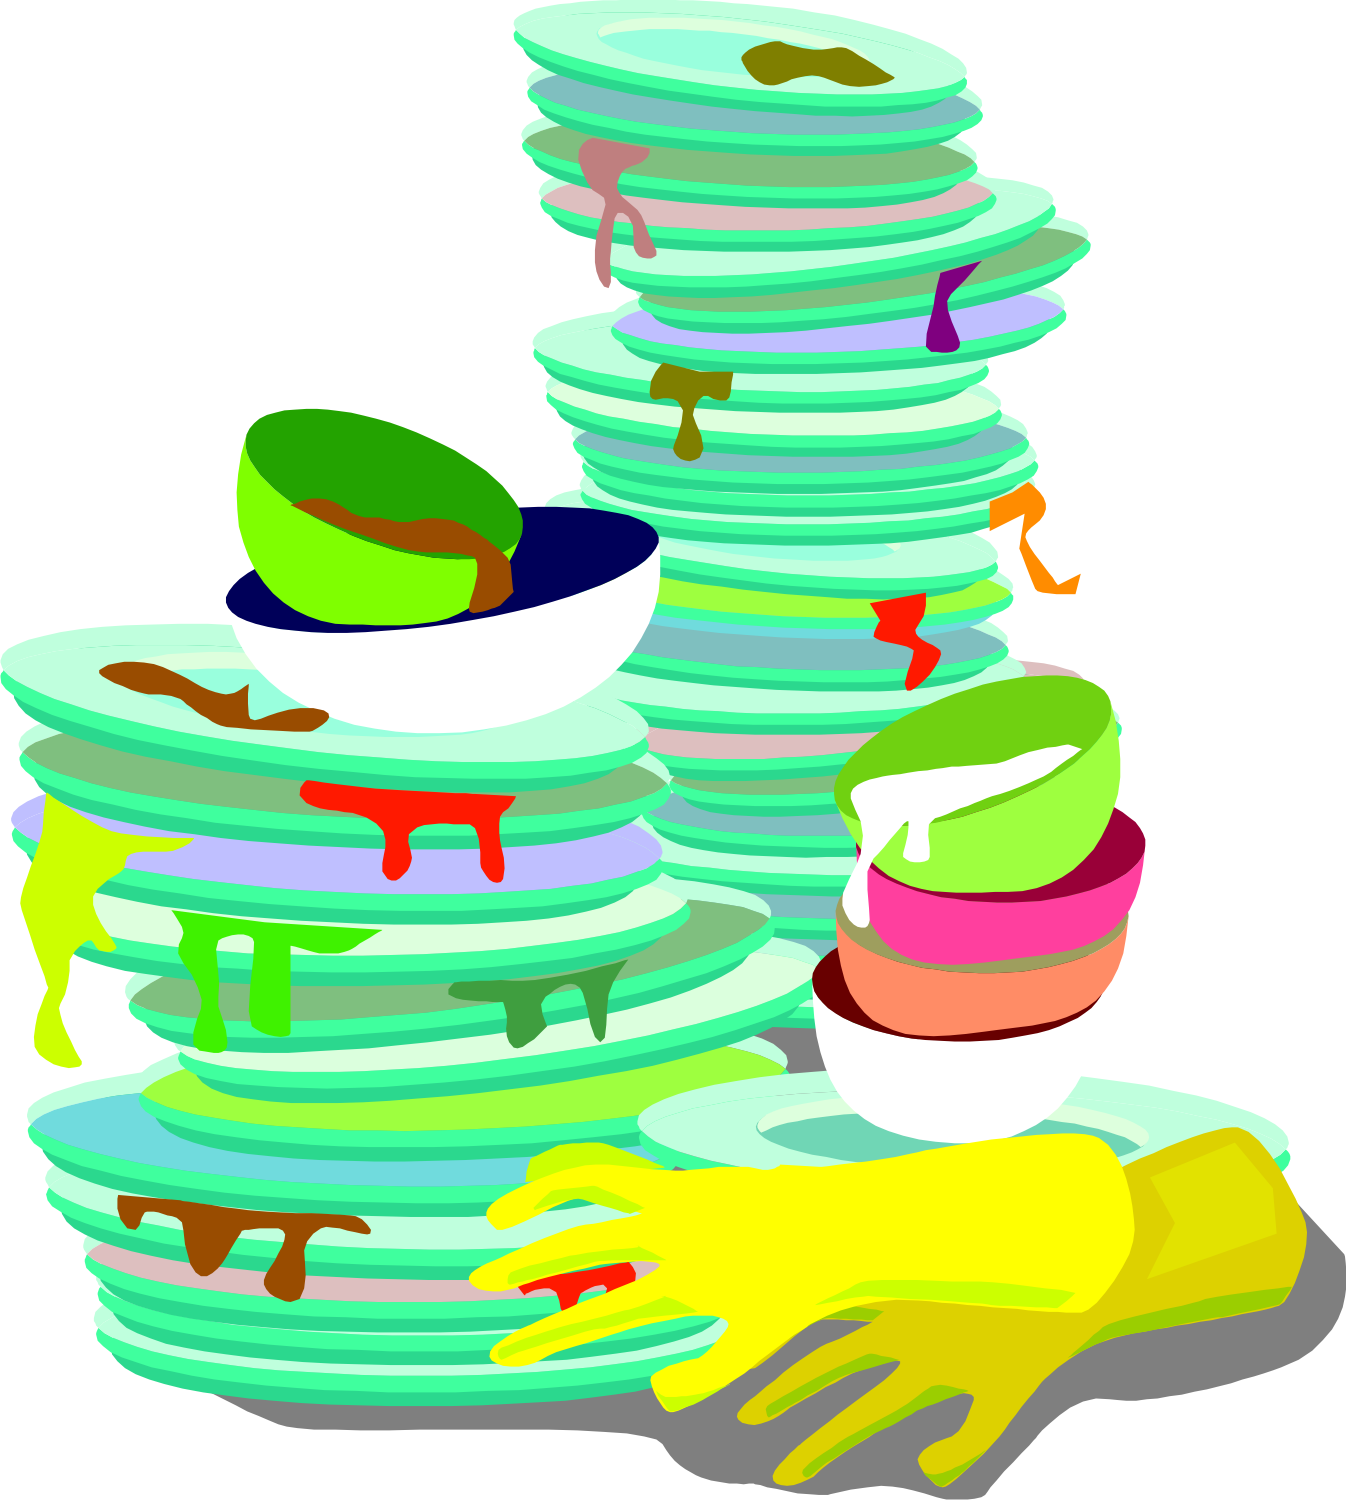 washing dishes clipart - Clip Art Library.